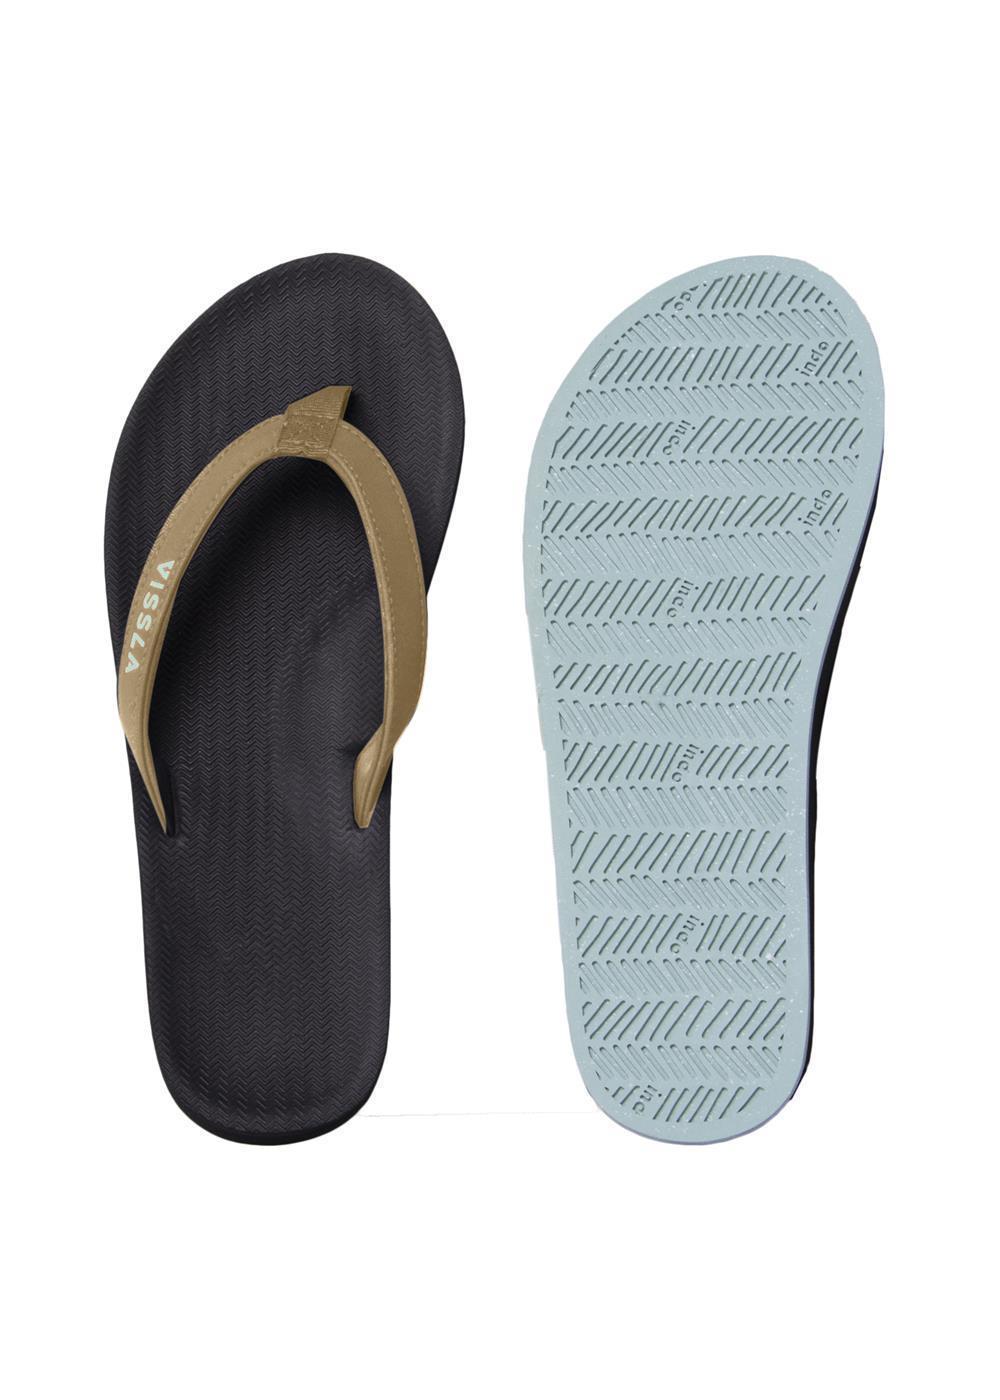 Vissla Sandals with a Black Base and Brown Toe Thong and an upside down sandal with a white sole - Top View